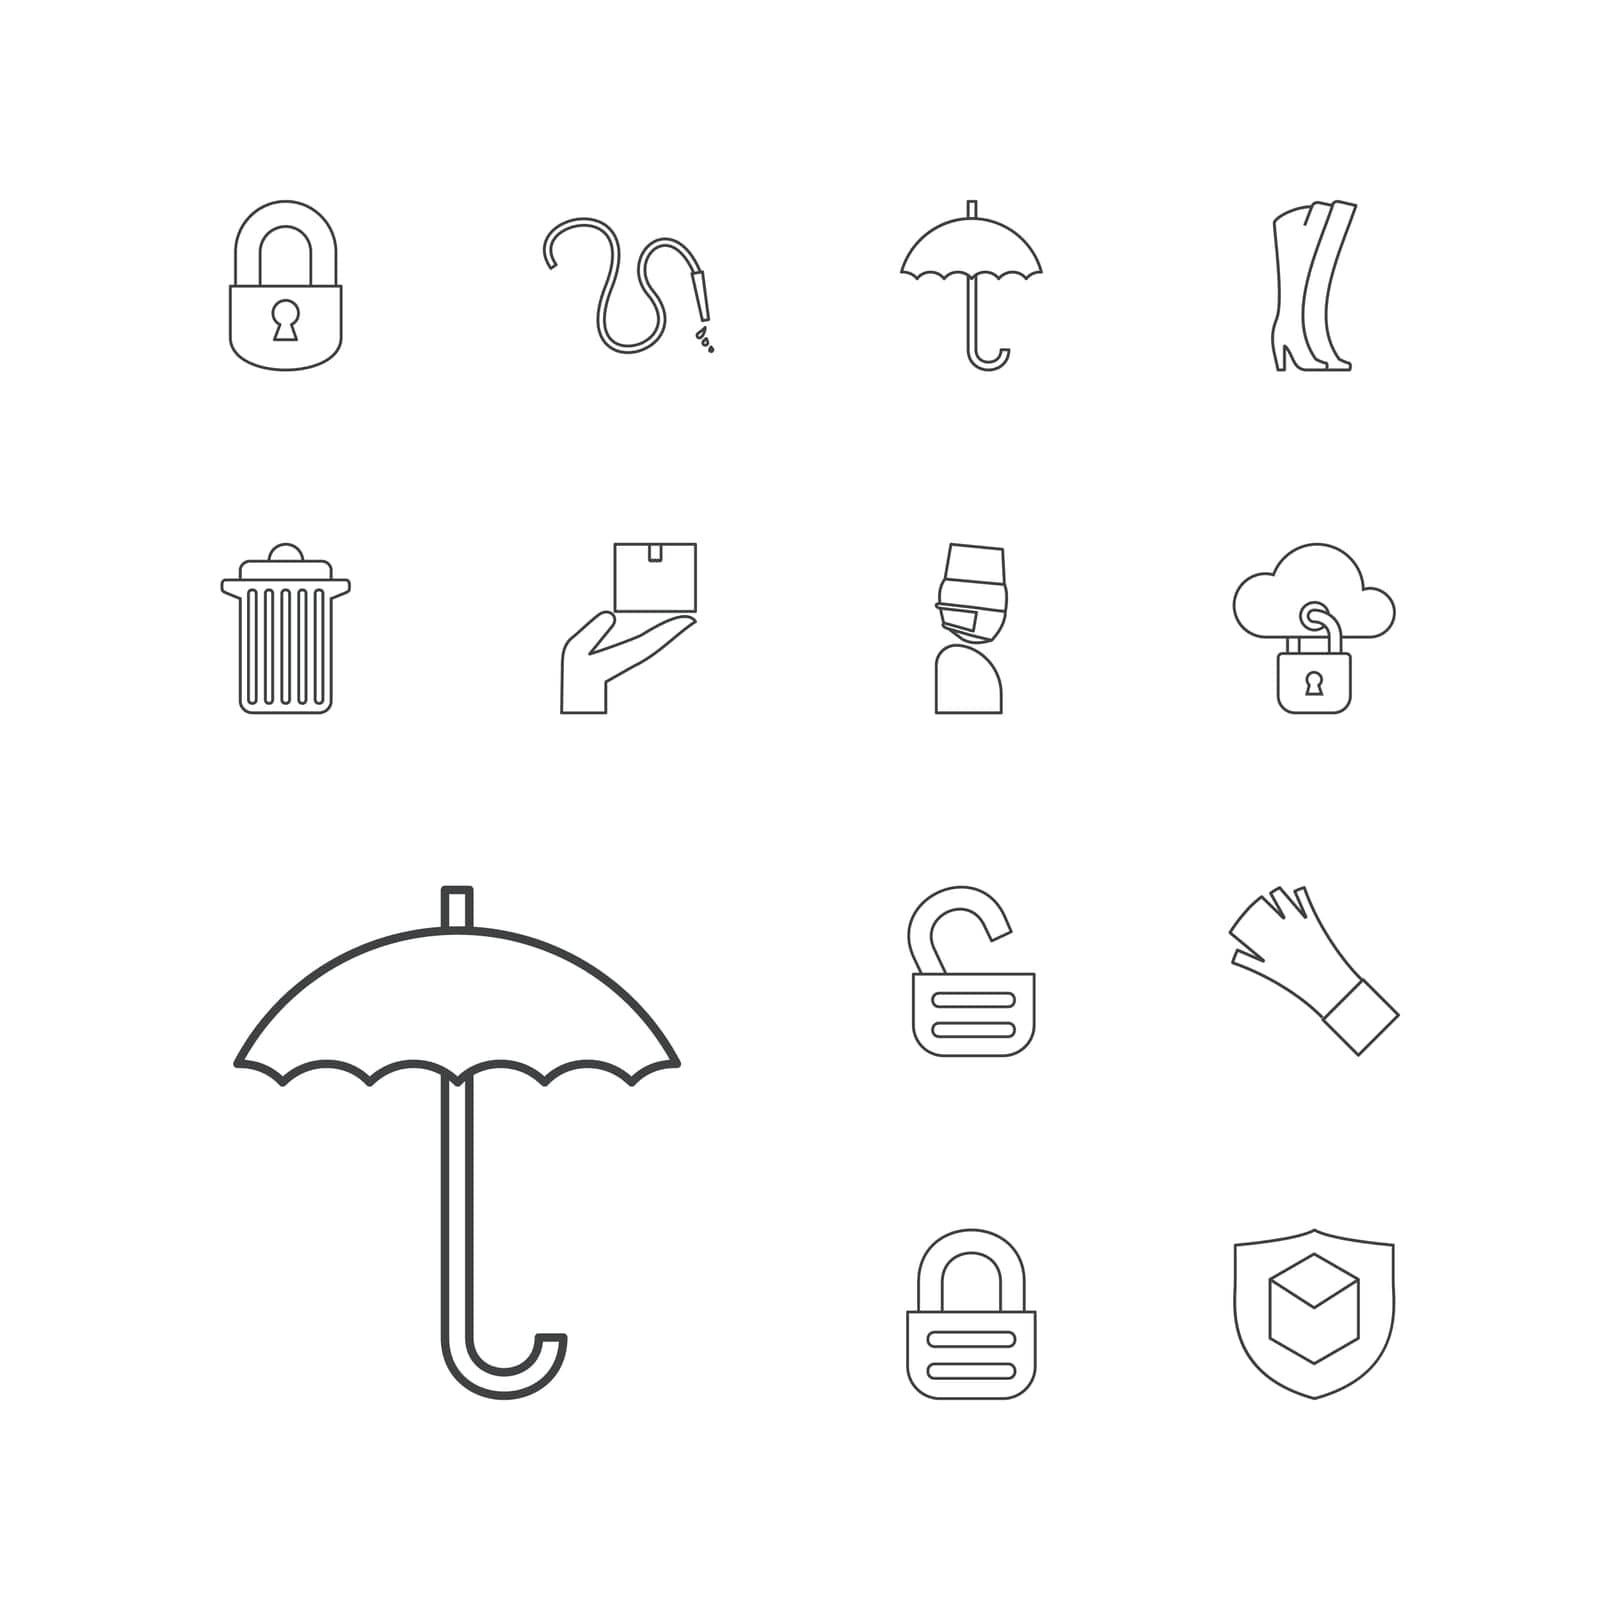 insurance,symbol,medical,woman,bin,icon,sign,isolated,protection,secure,delete,cloud,security,gloves,white,web,flat,safety,design,boots,lock,vector,cargo,element,mask,set,business,umbrella,hose,dry,opened,water,trash,background,keep,illustration,internet,object by ogqcorp